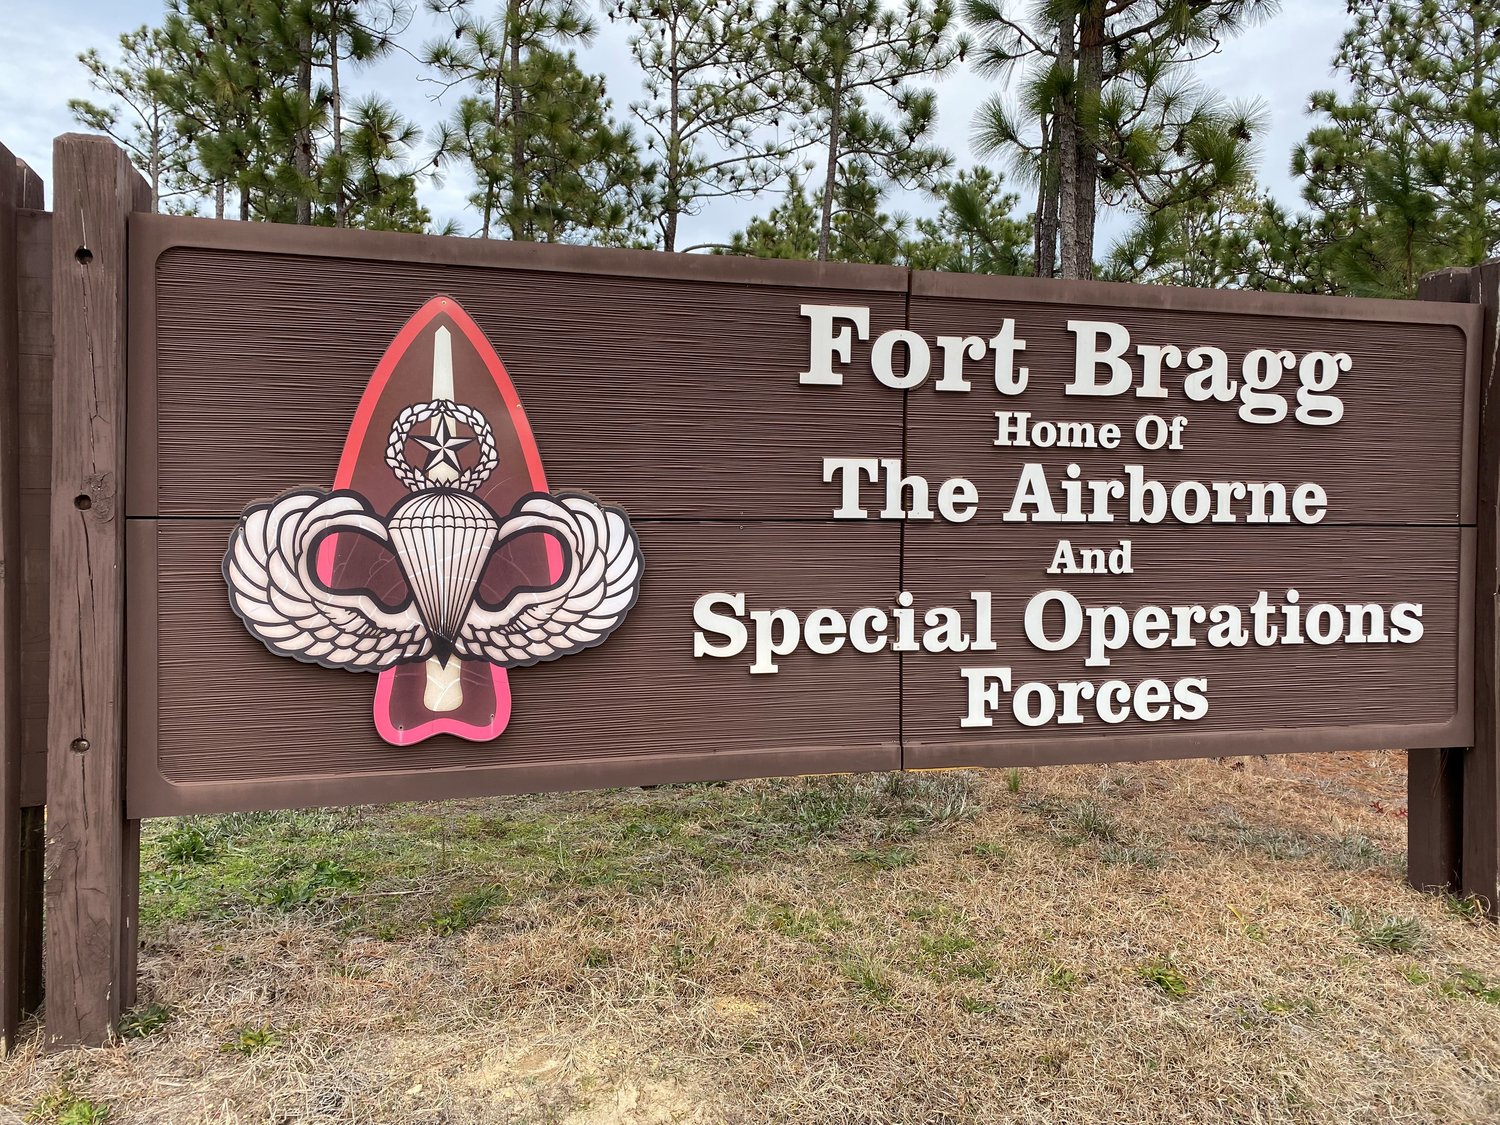 The Naming Commission has recommended that Fort Bragg be renamed Fort Liberty.